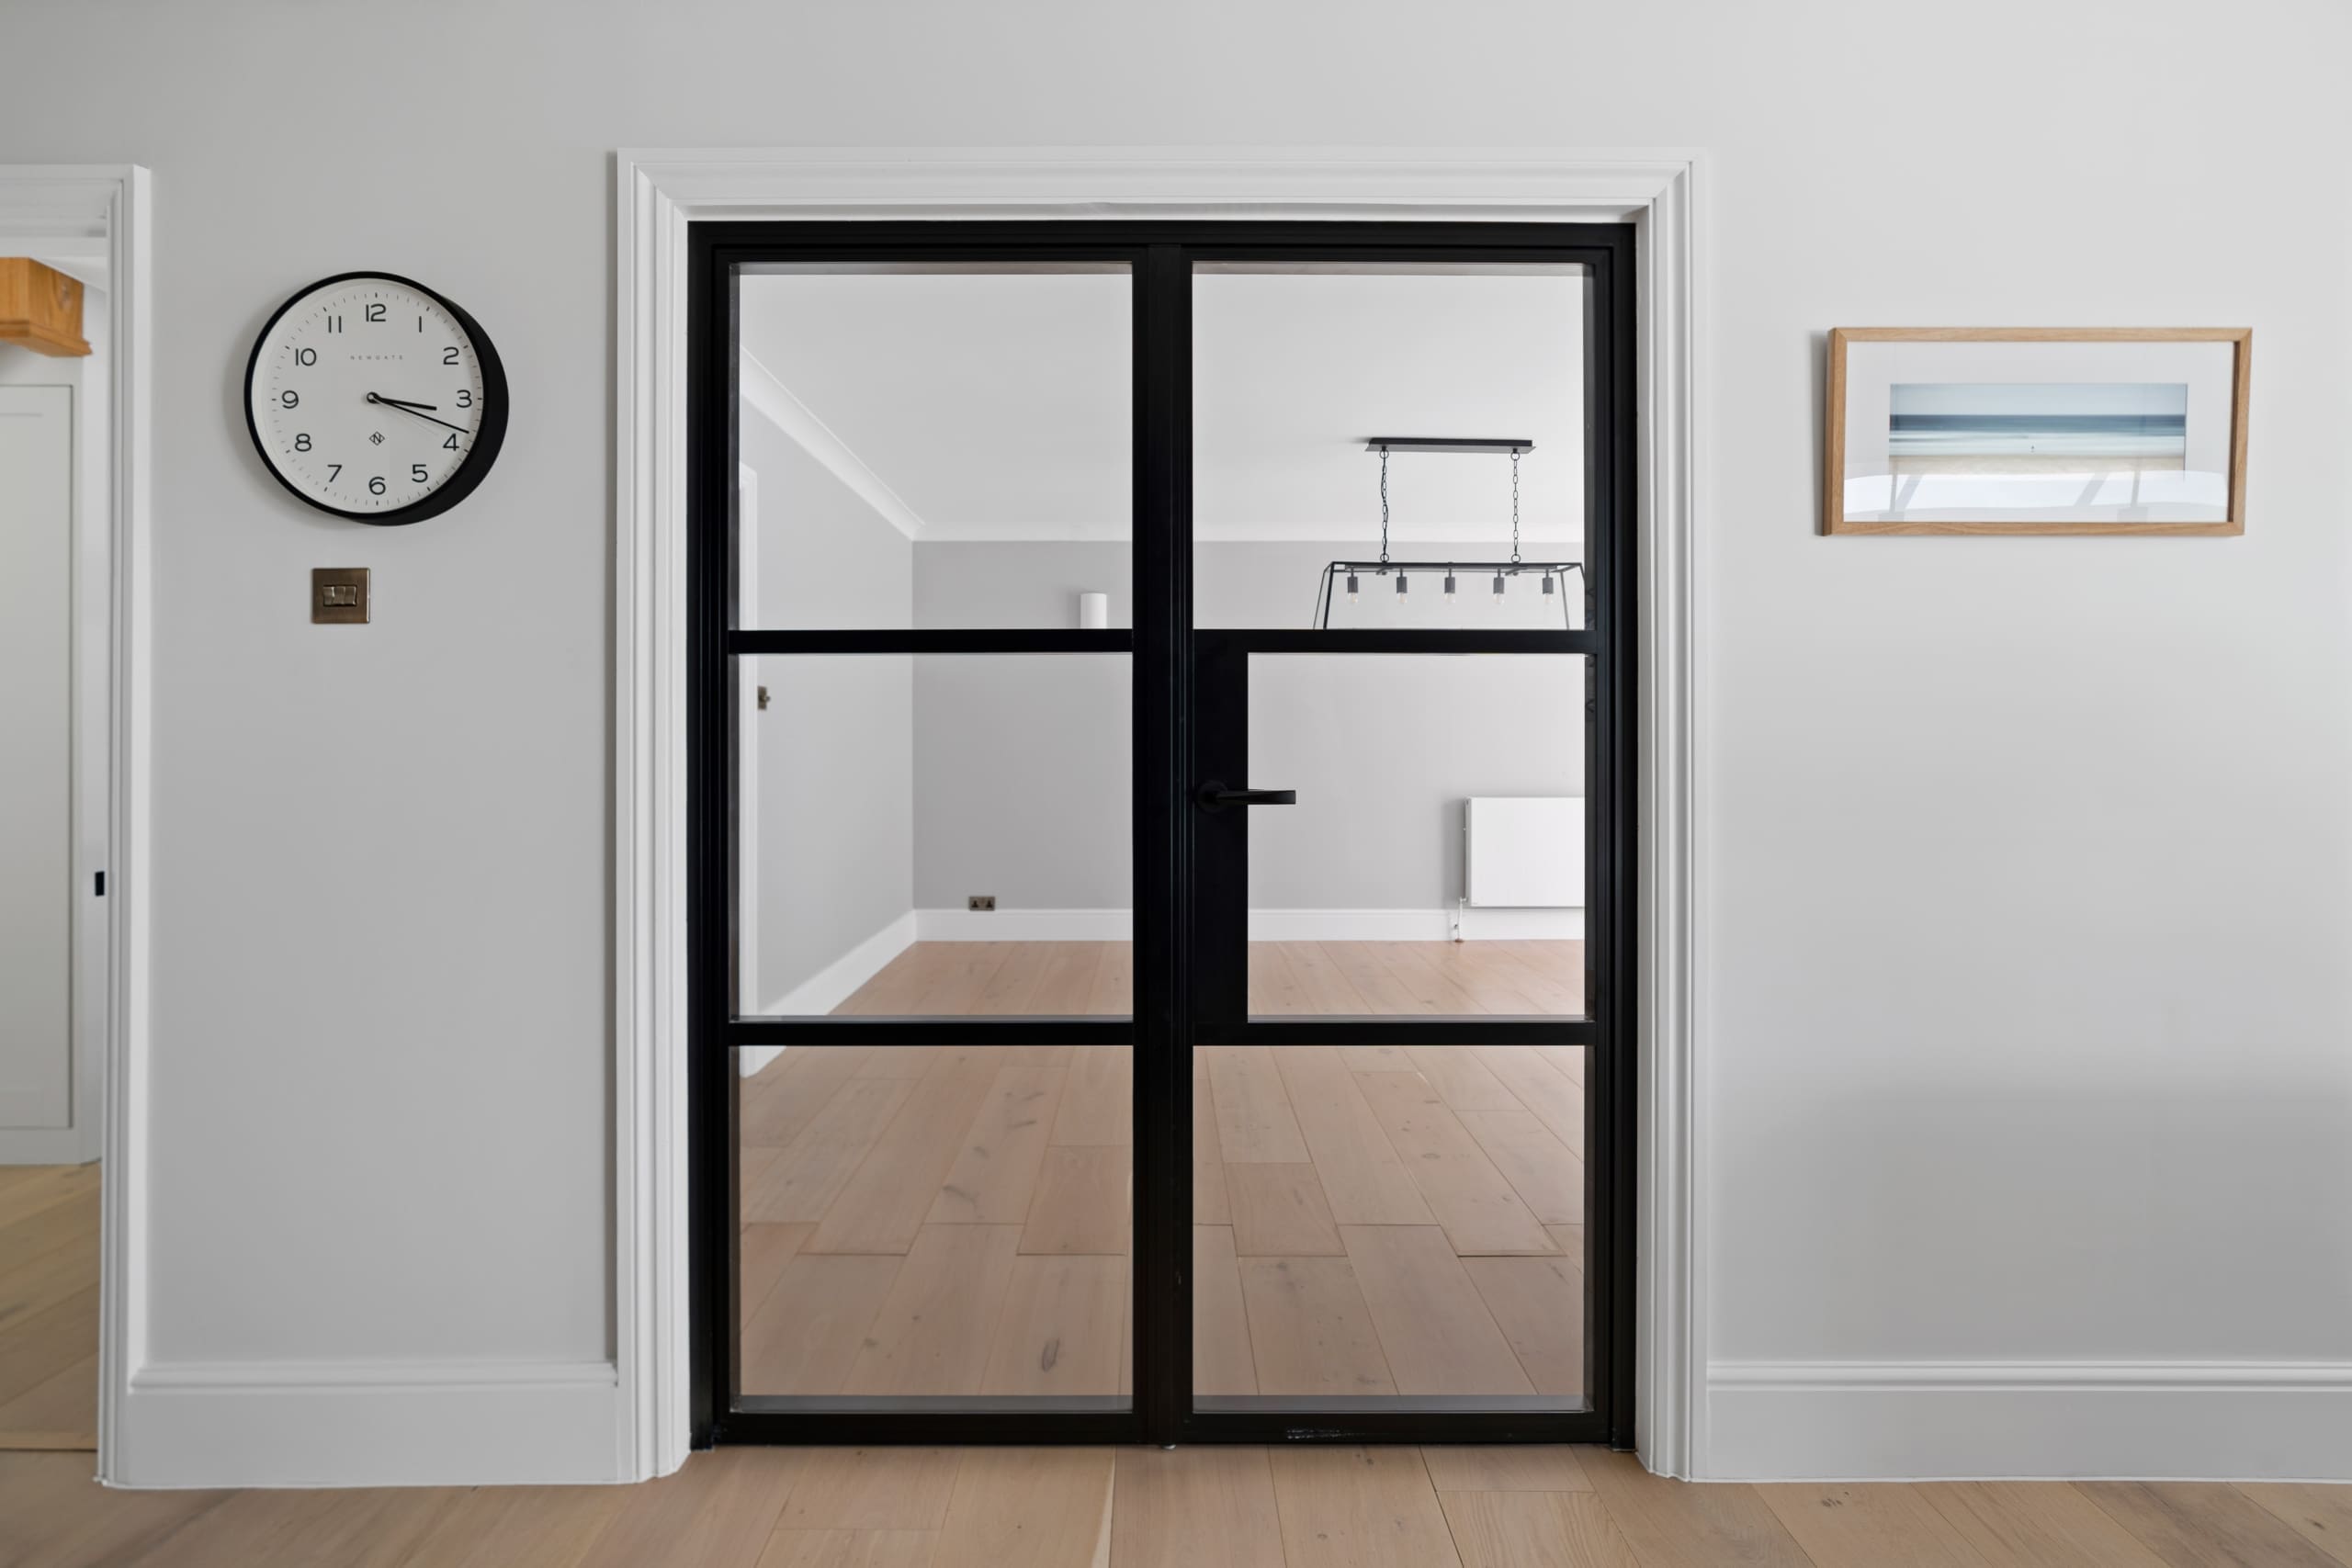 Aluminium black internal french doors with modern clock to the left of the frame hanging on a light grey wall.